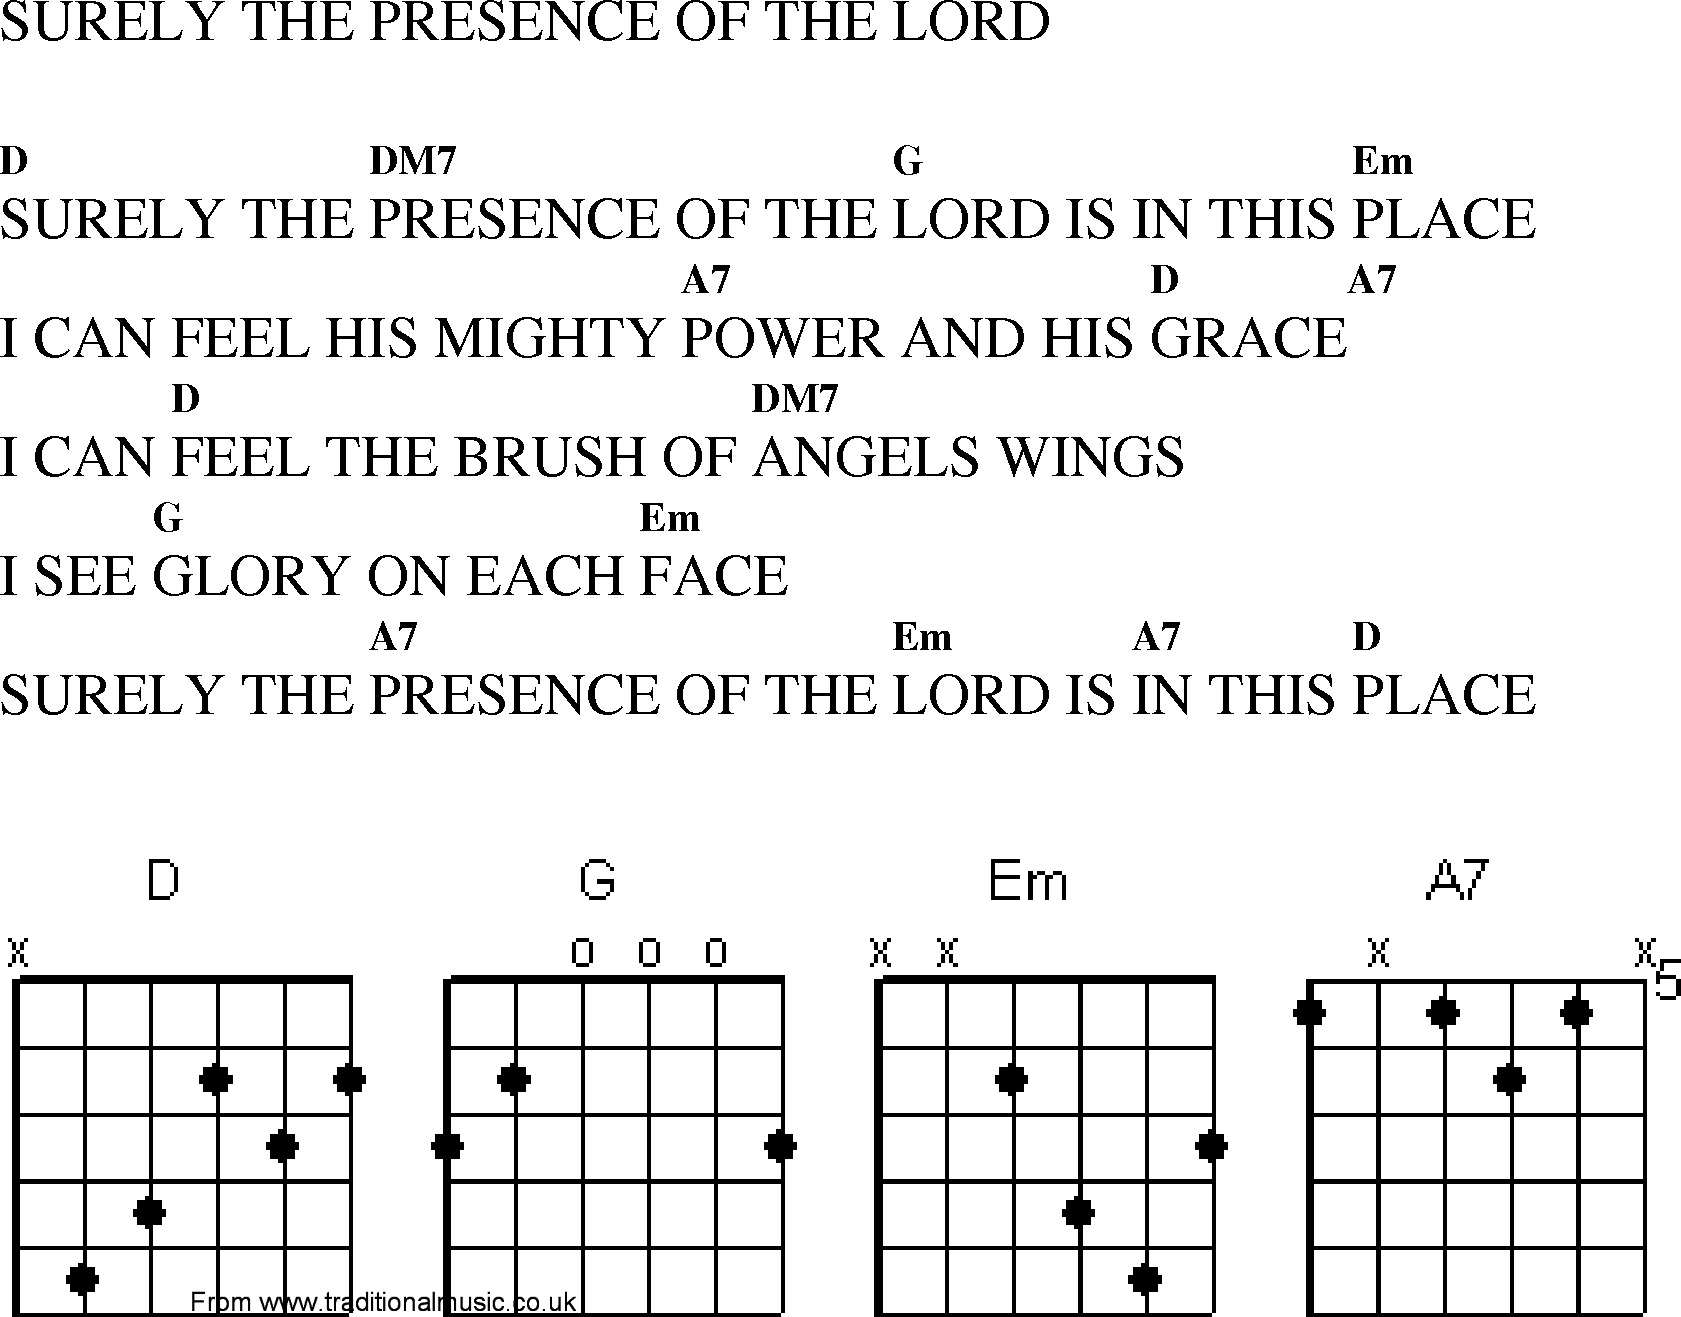 Gospel Song: surely_the_presence_of_the_lord, lyrics and chords.